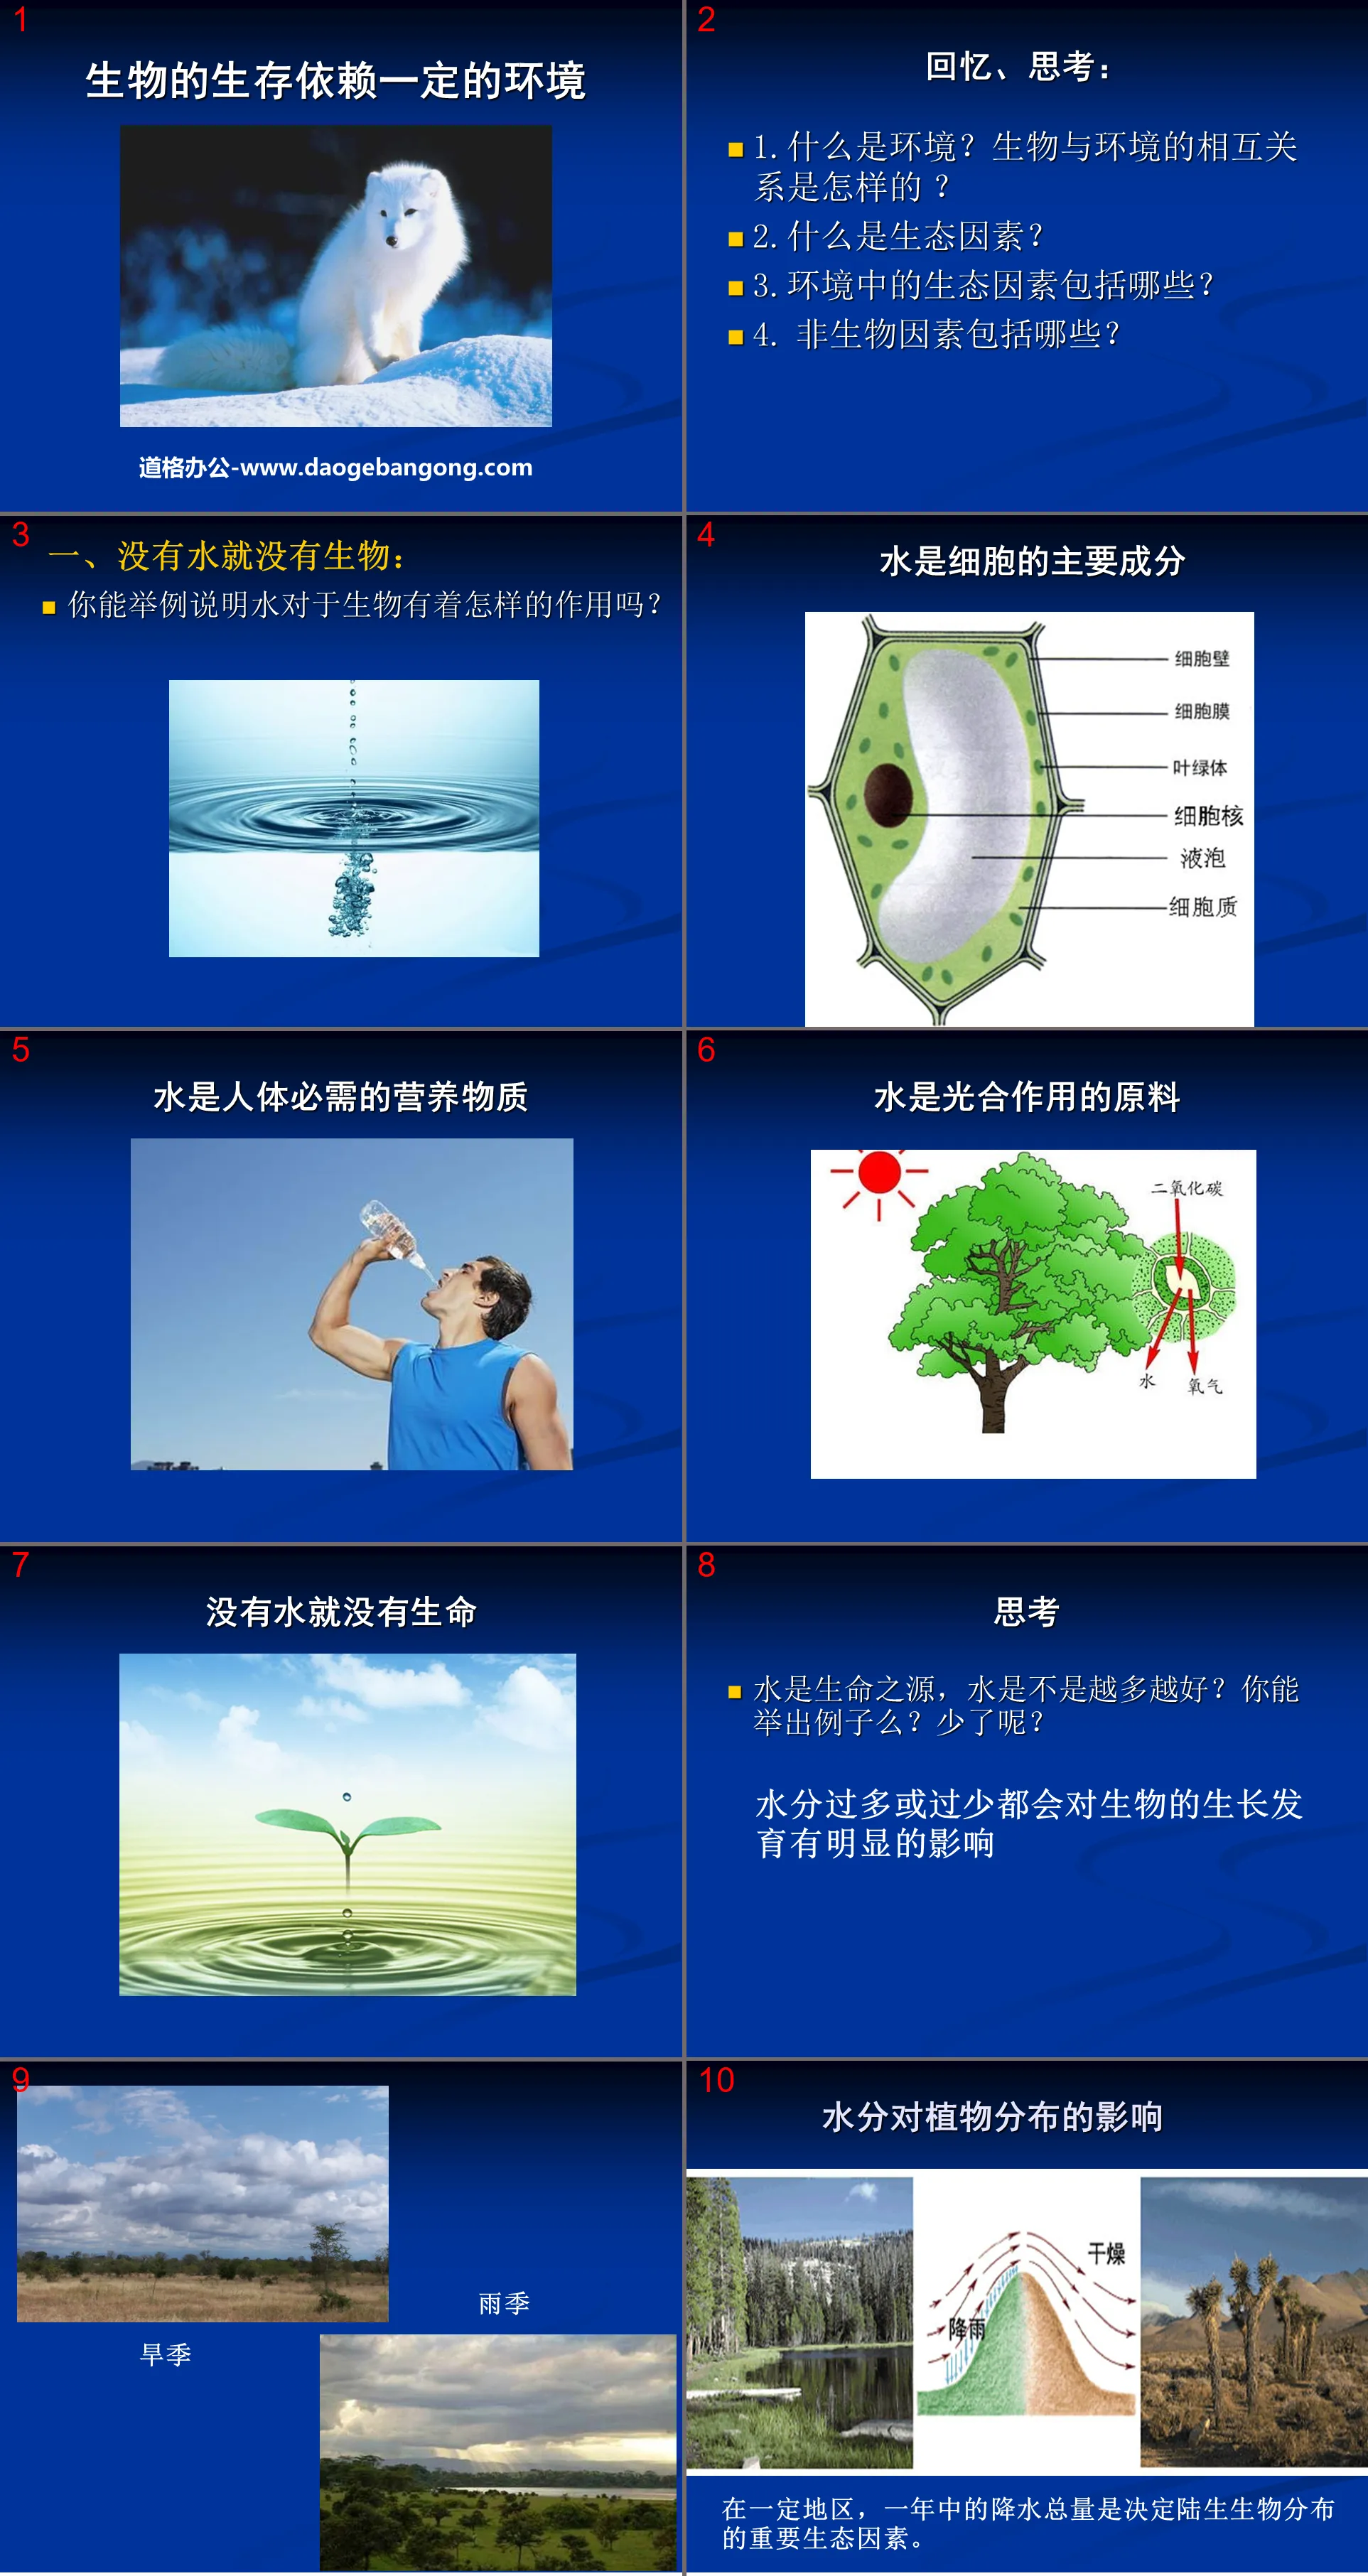 "The survival of living things depends on a certain environment" PPT courseware